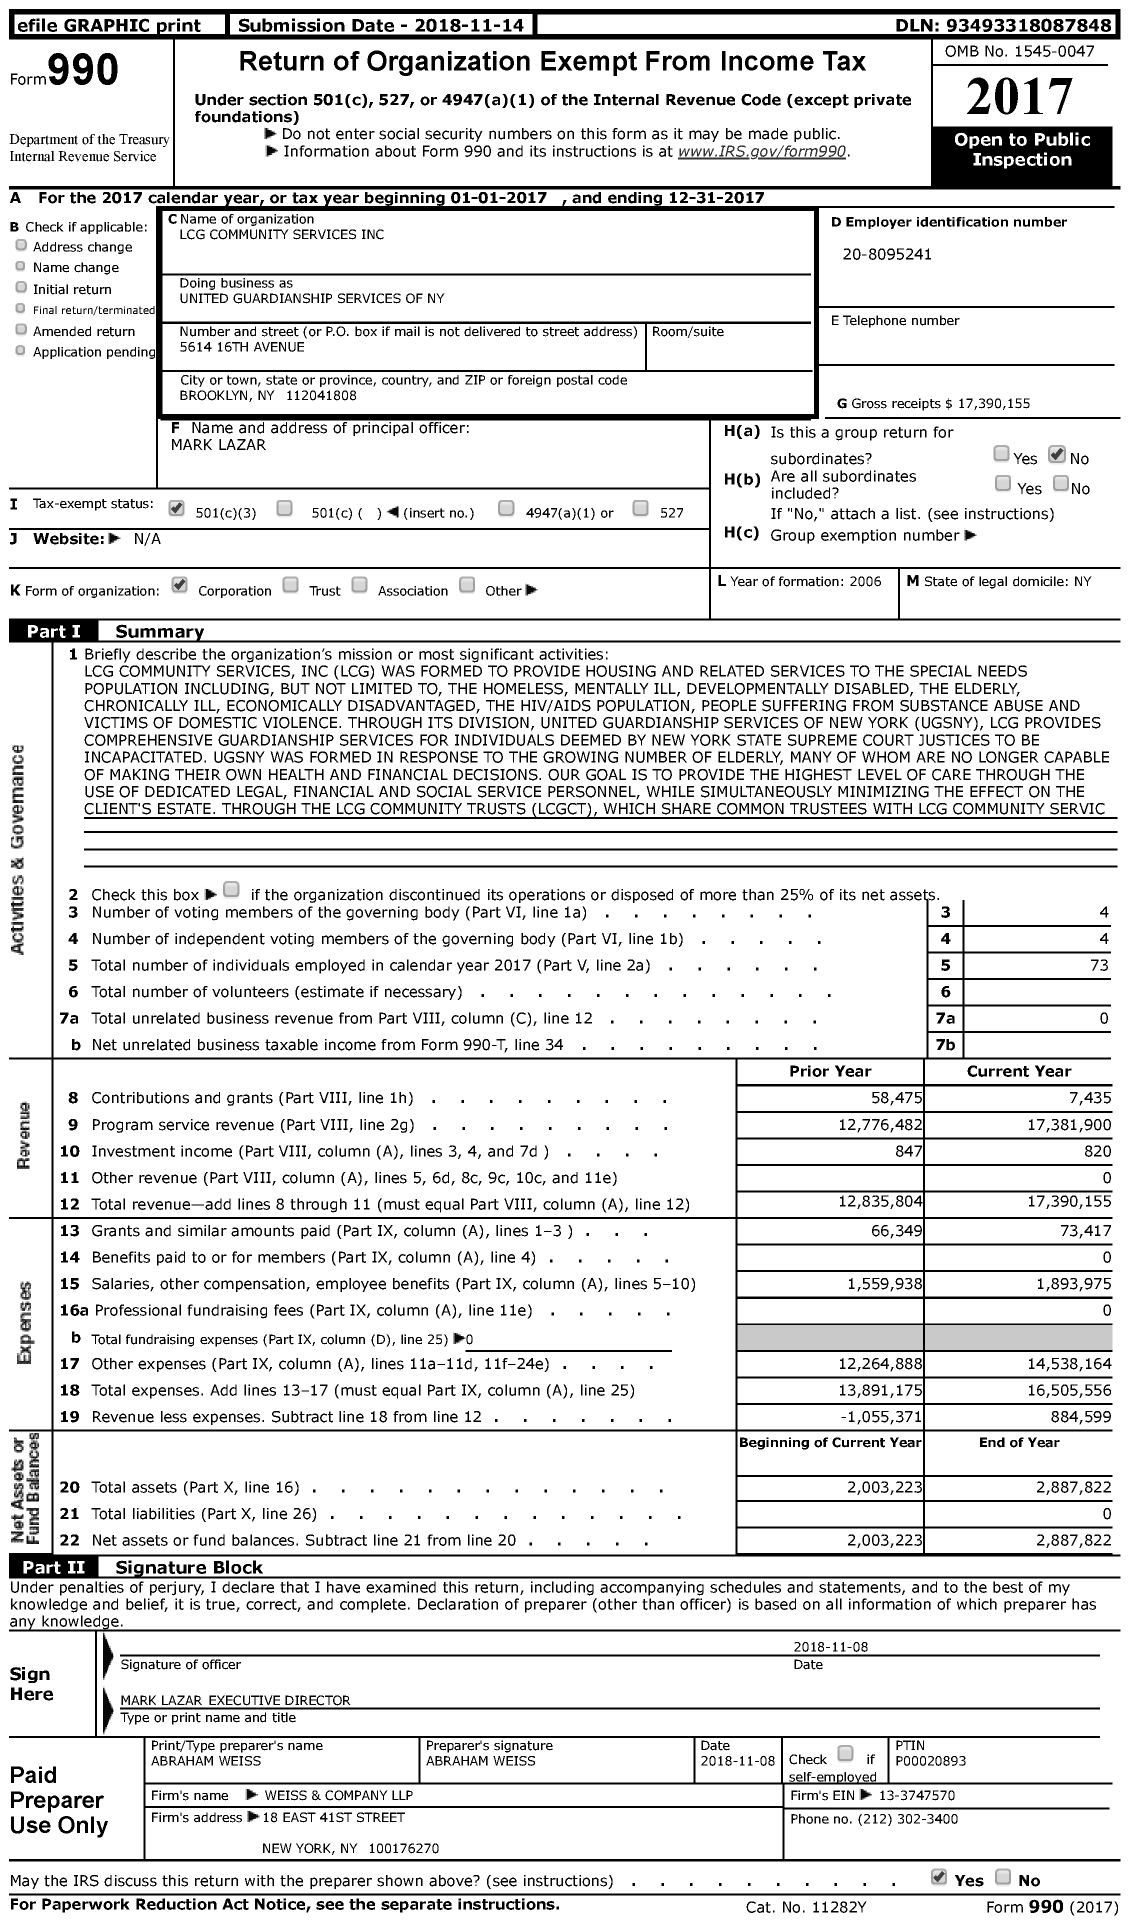 Image of first page of 2017 Form 990 for United Guardianship Services of Ny